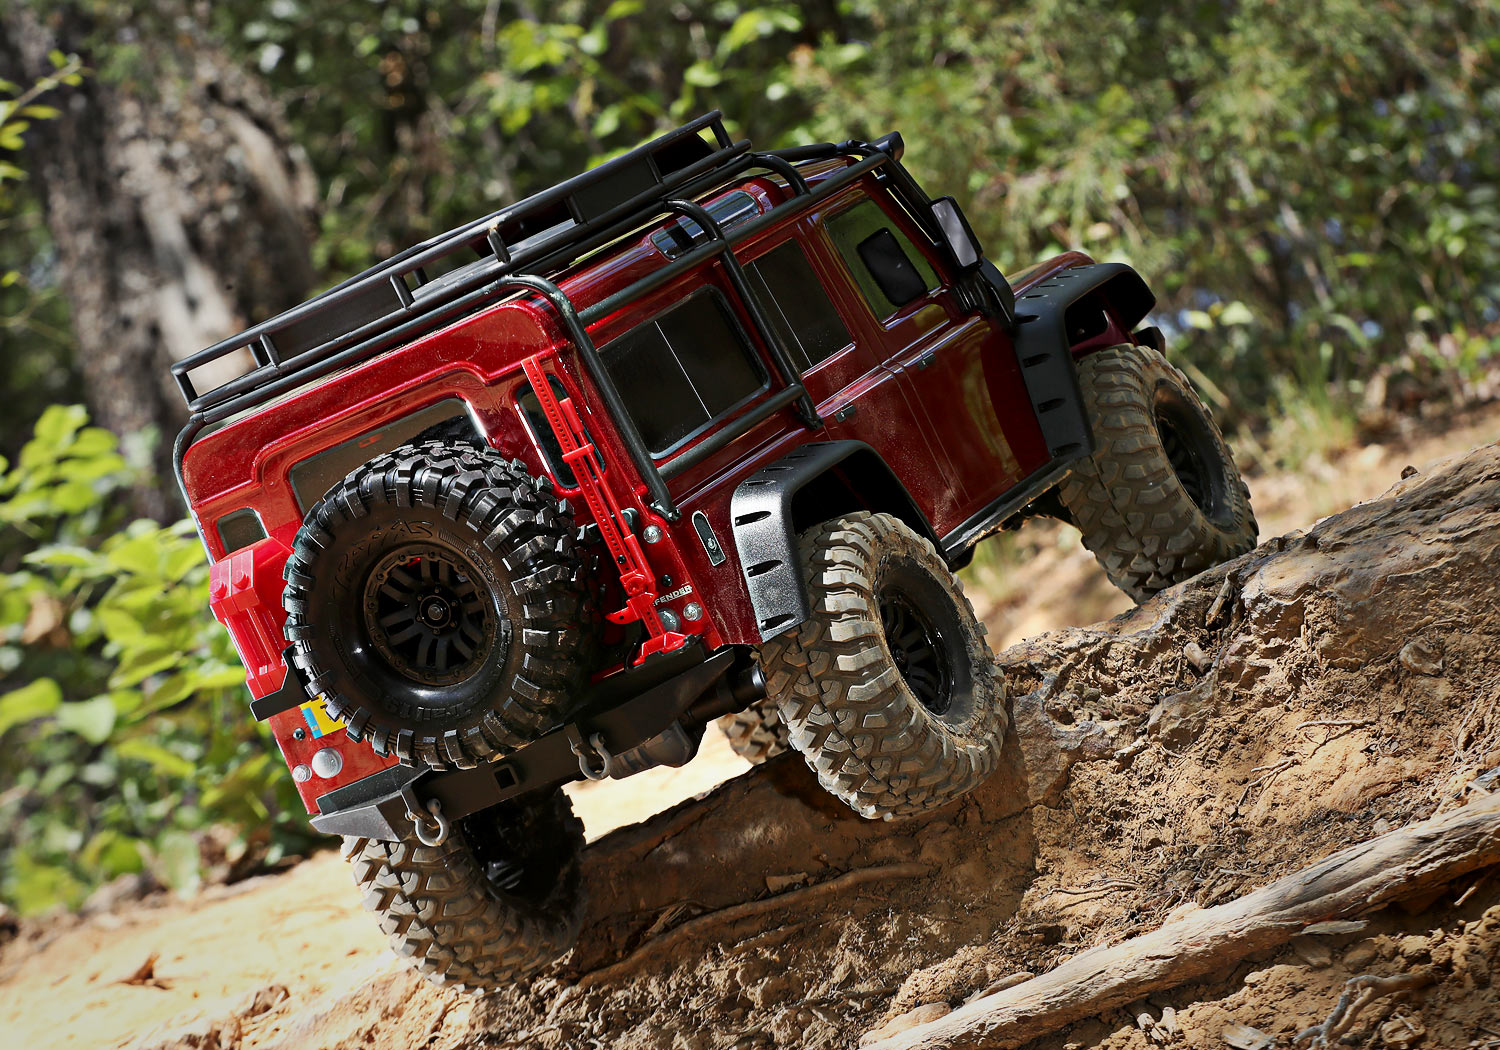 Traxxas 1/10 4WD Crawler RTR TRX-4 Land Rover Defender - Red TRA82056-4RED